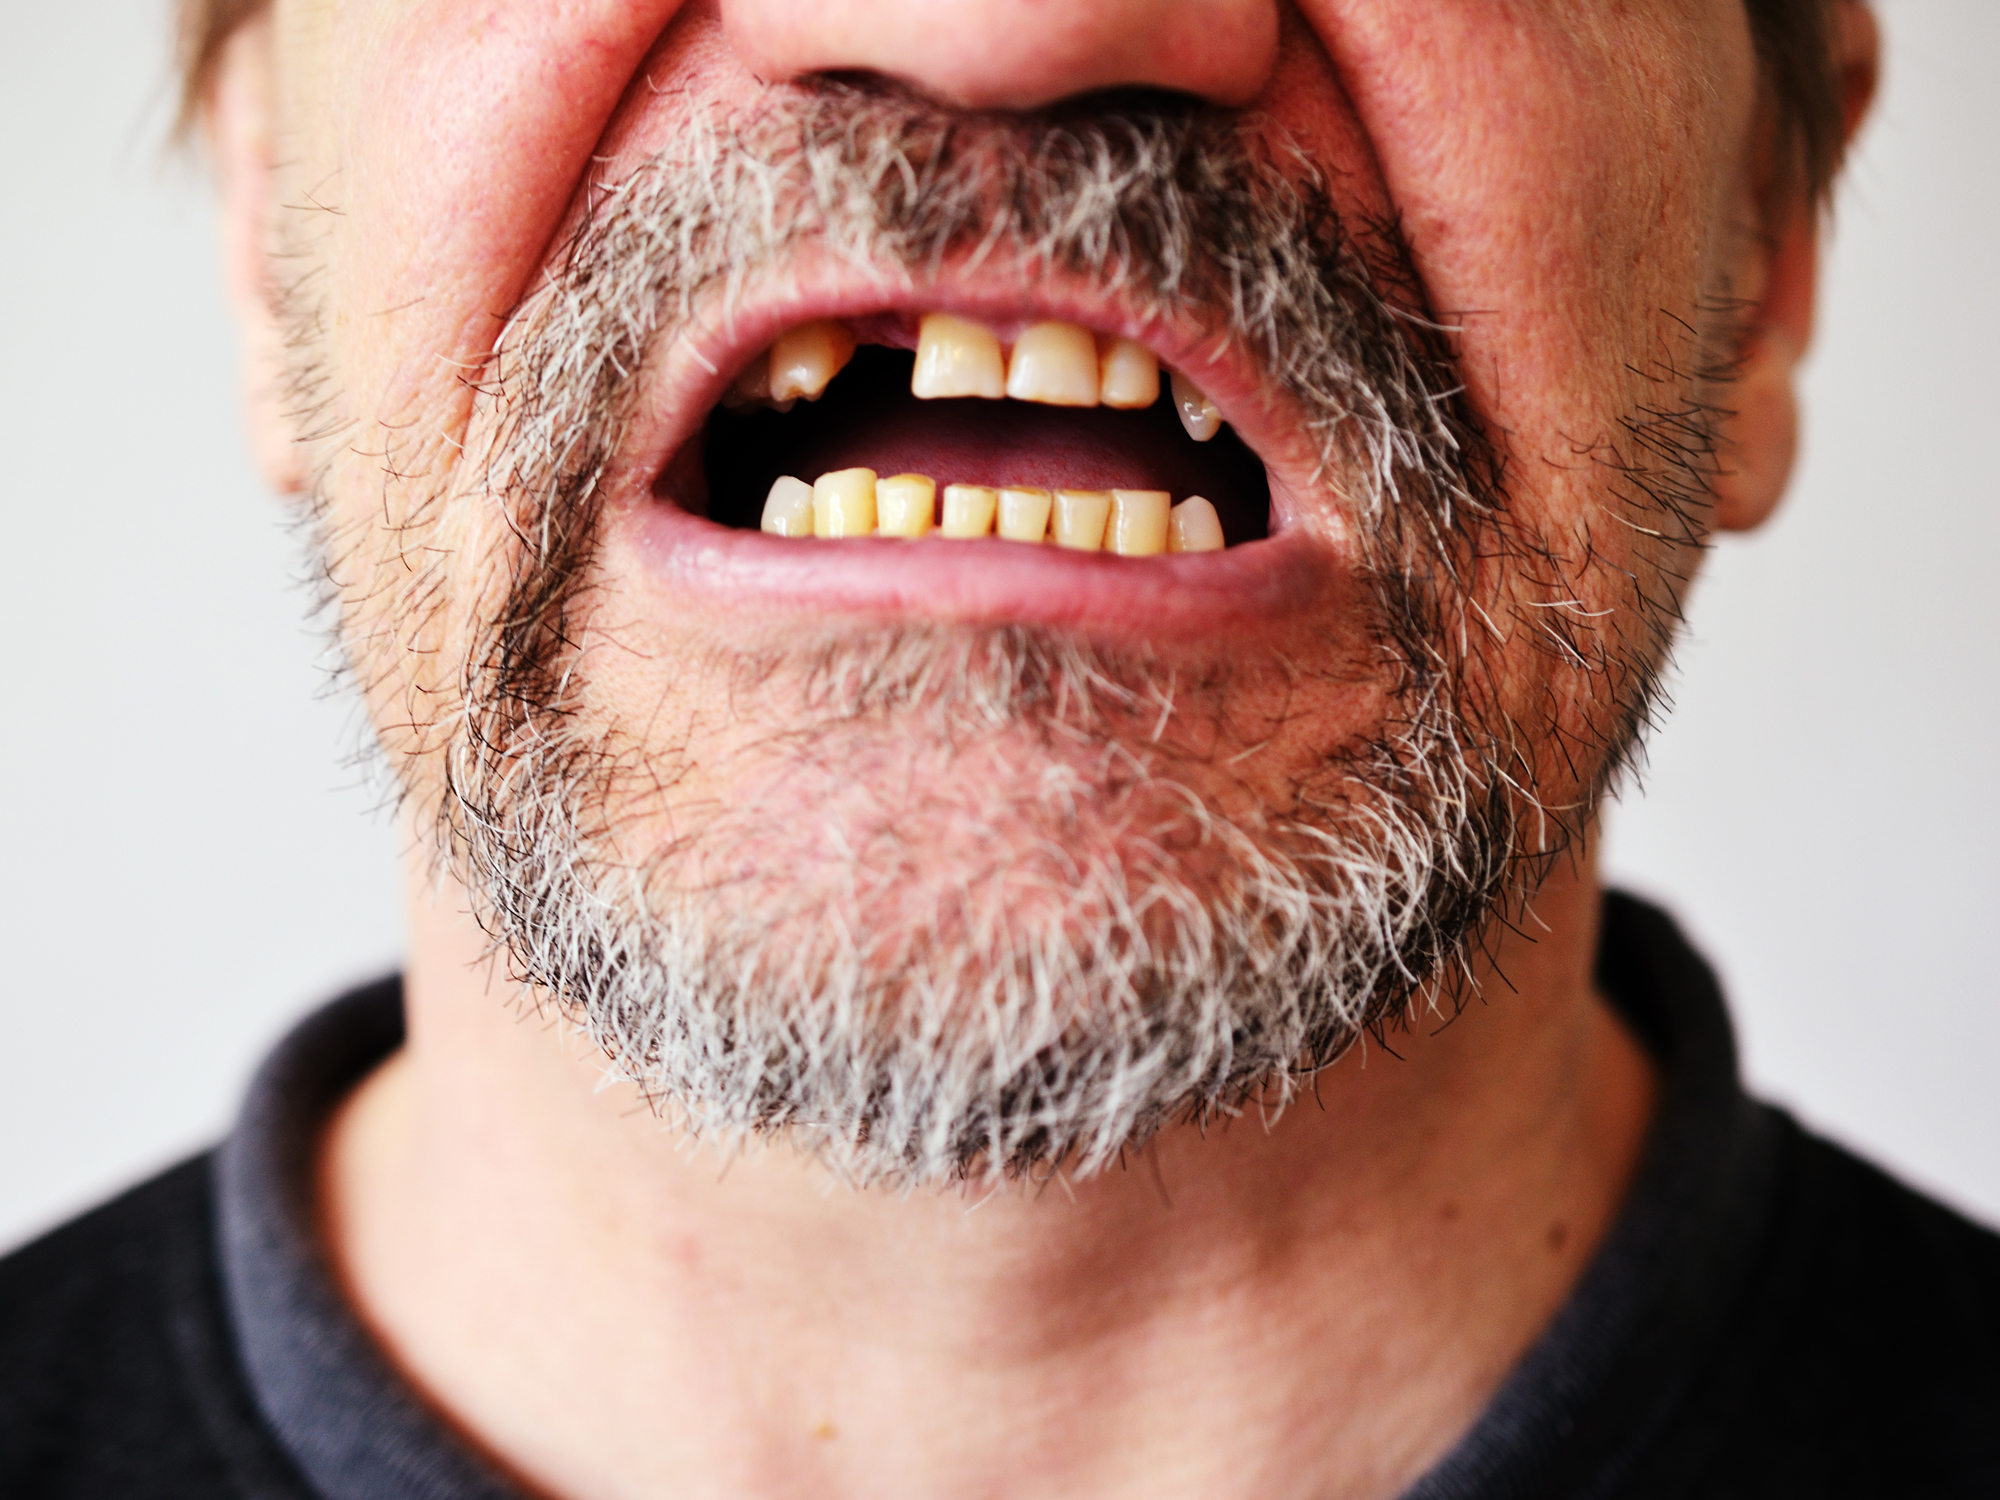 Why this disease sign makes your teeth fall out